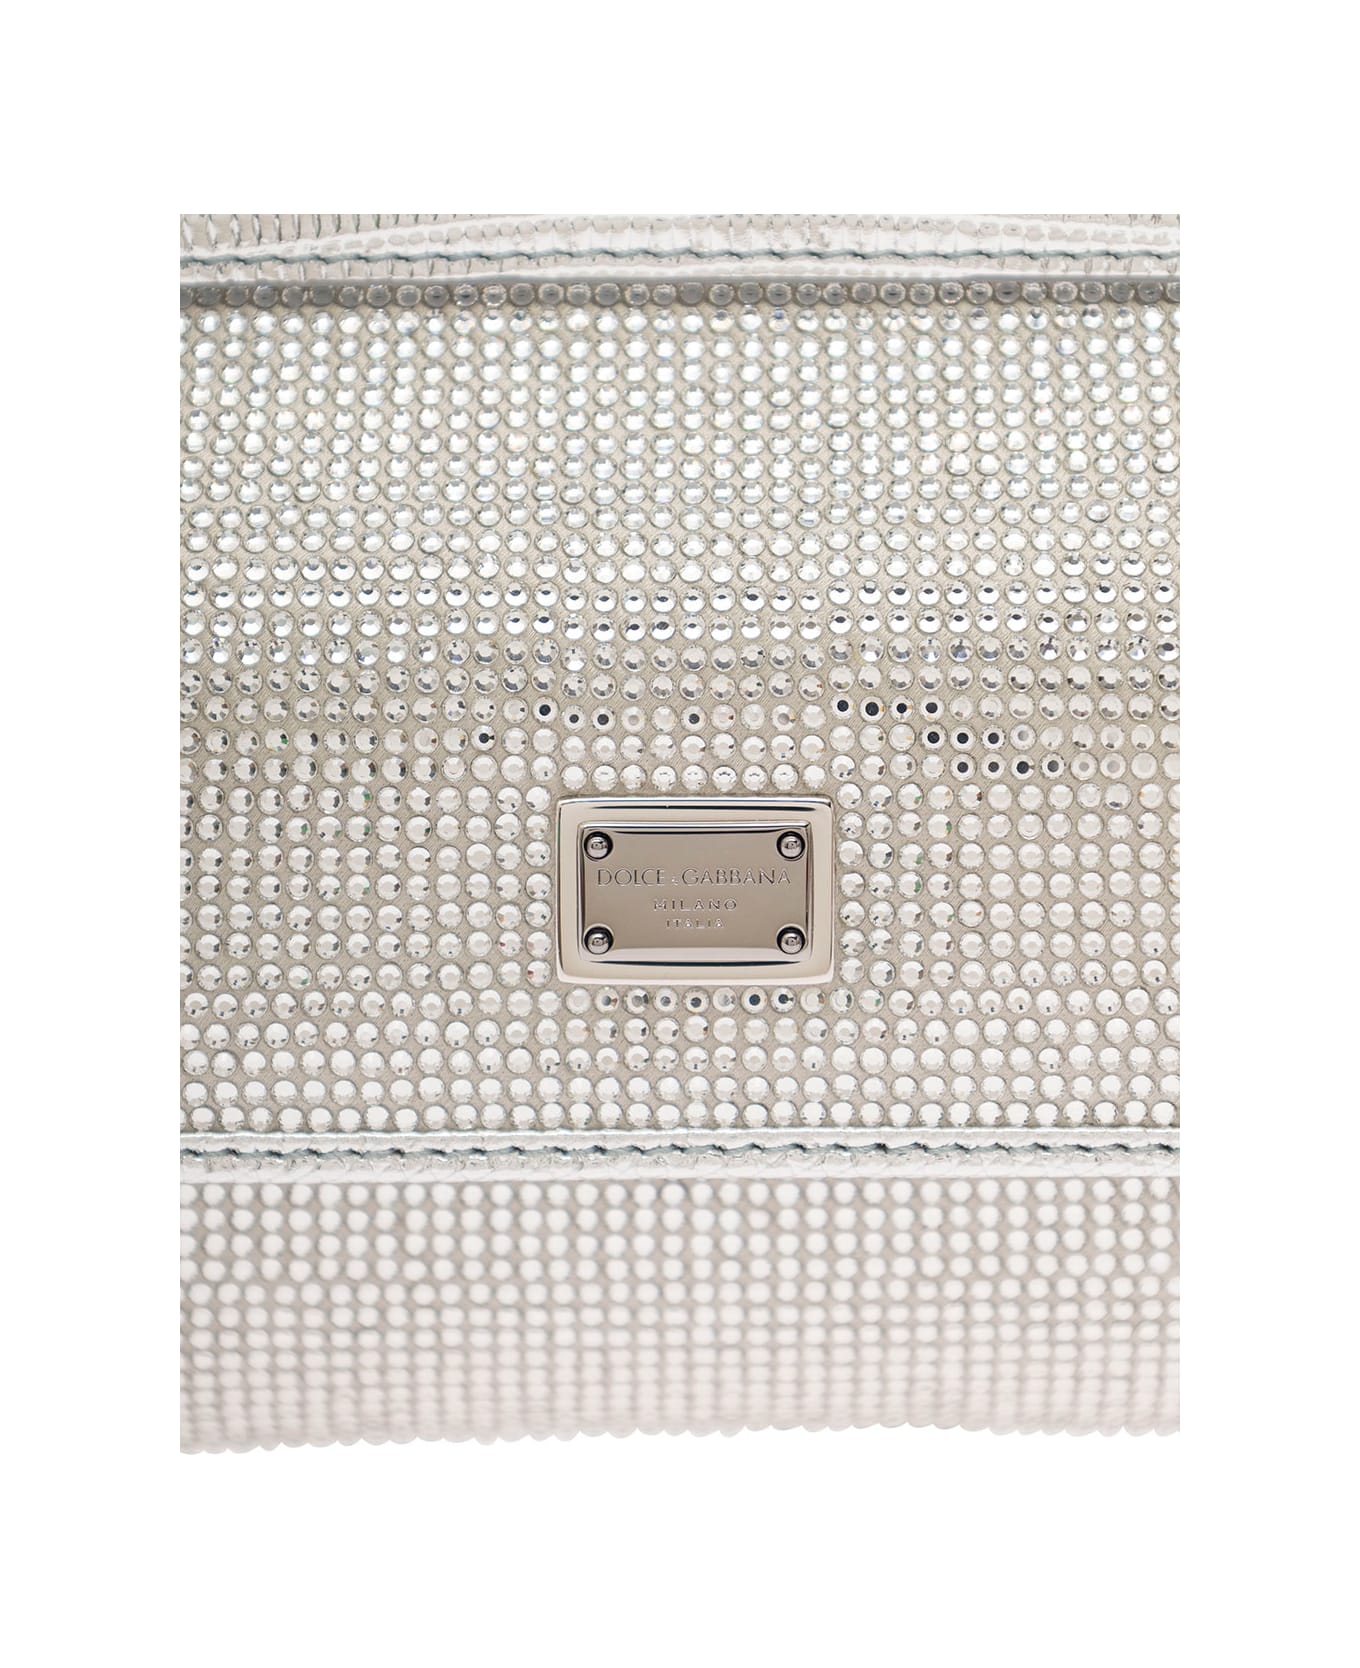 Dolce & Gabbana 'sicily Crystal' Silver-tone Handbag With Logo Tag In Leather Blend Woman - Metallic